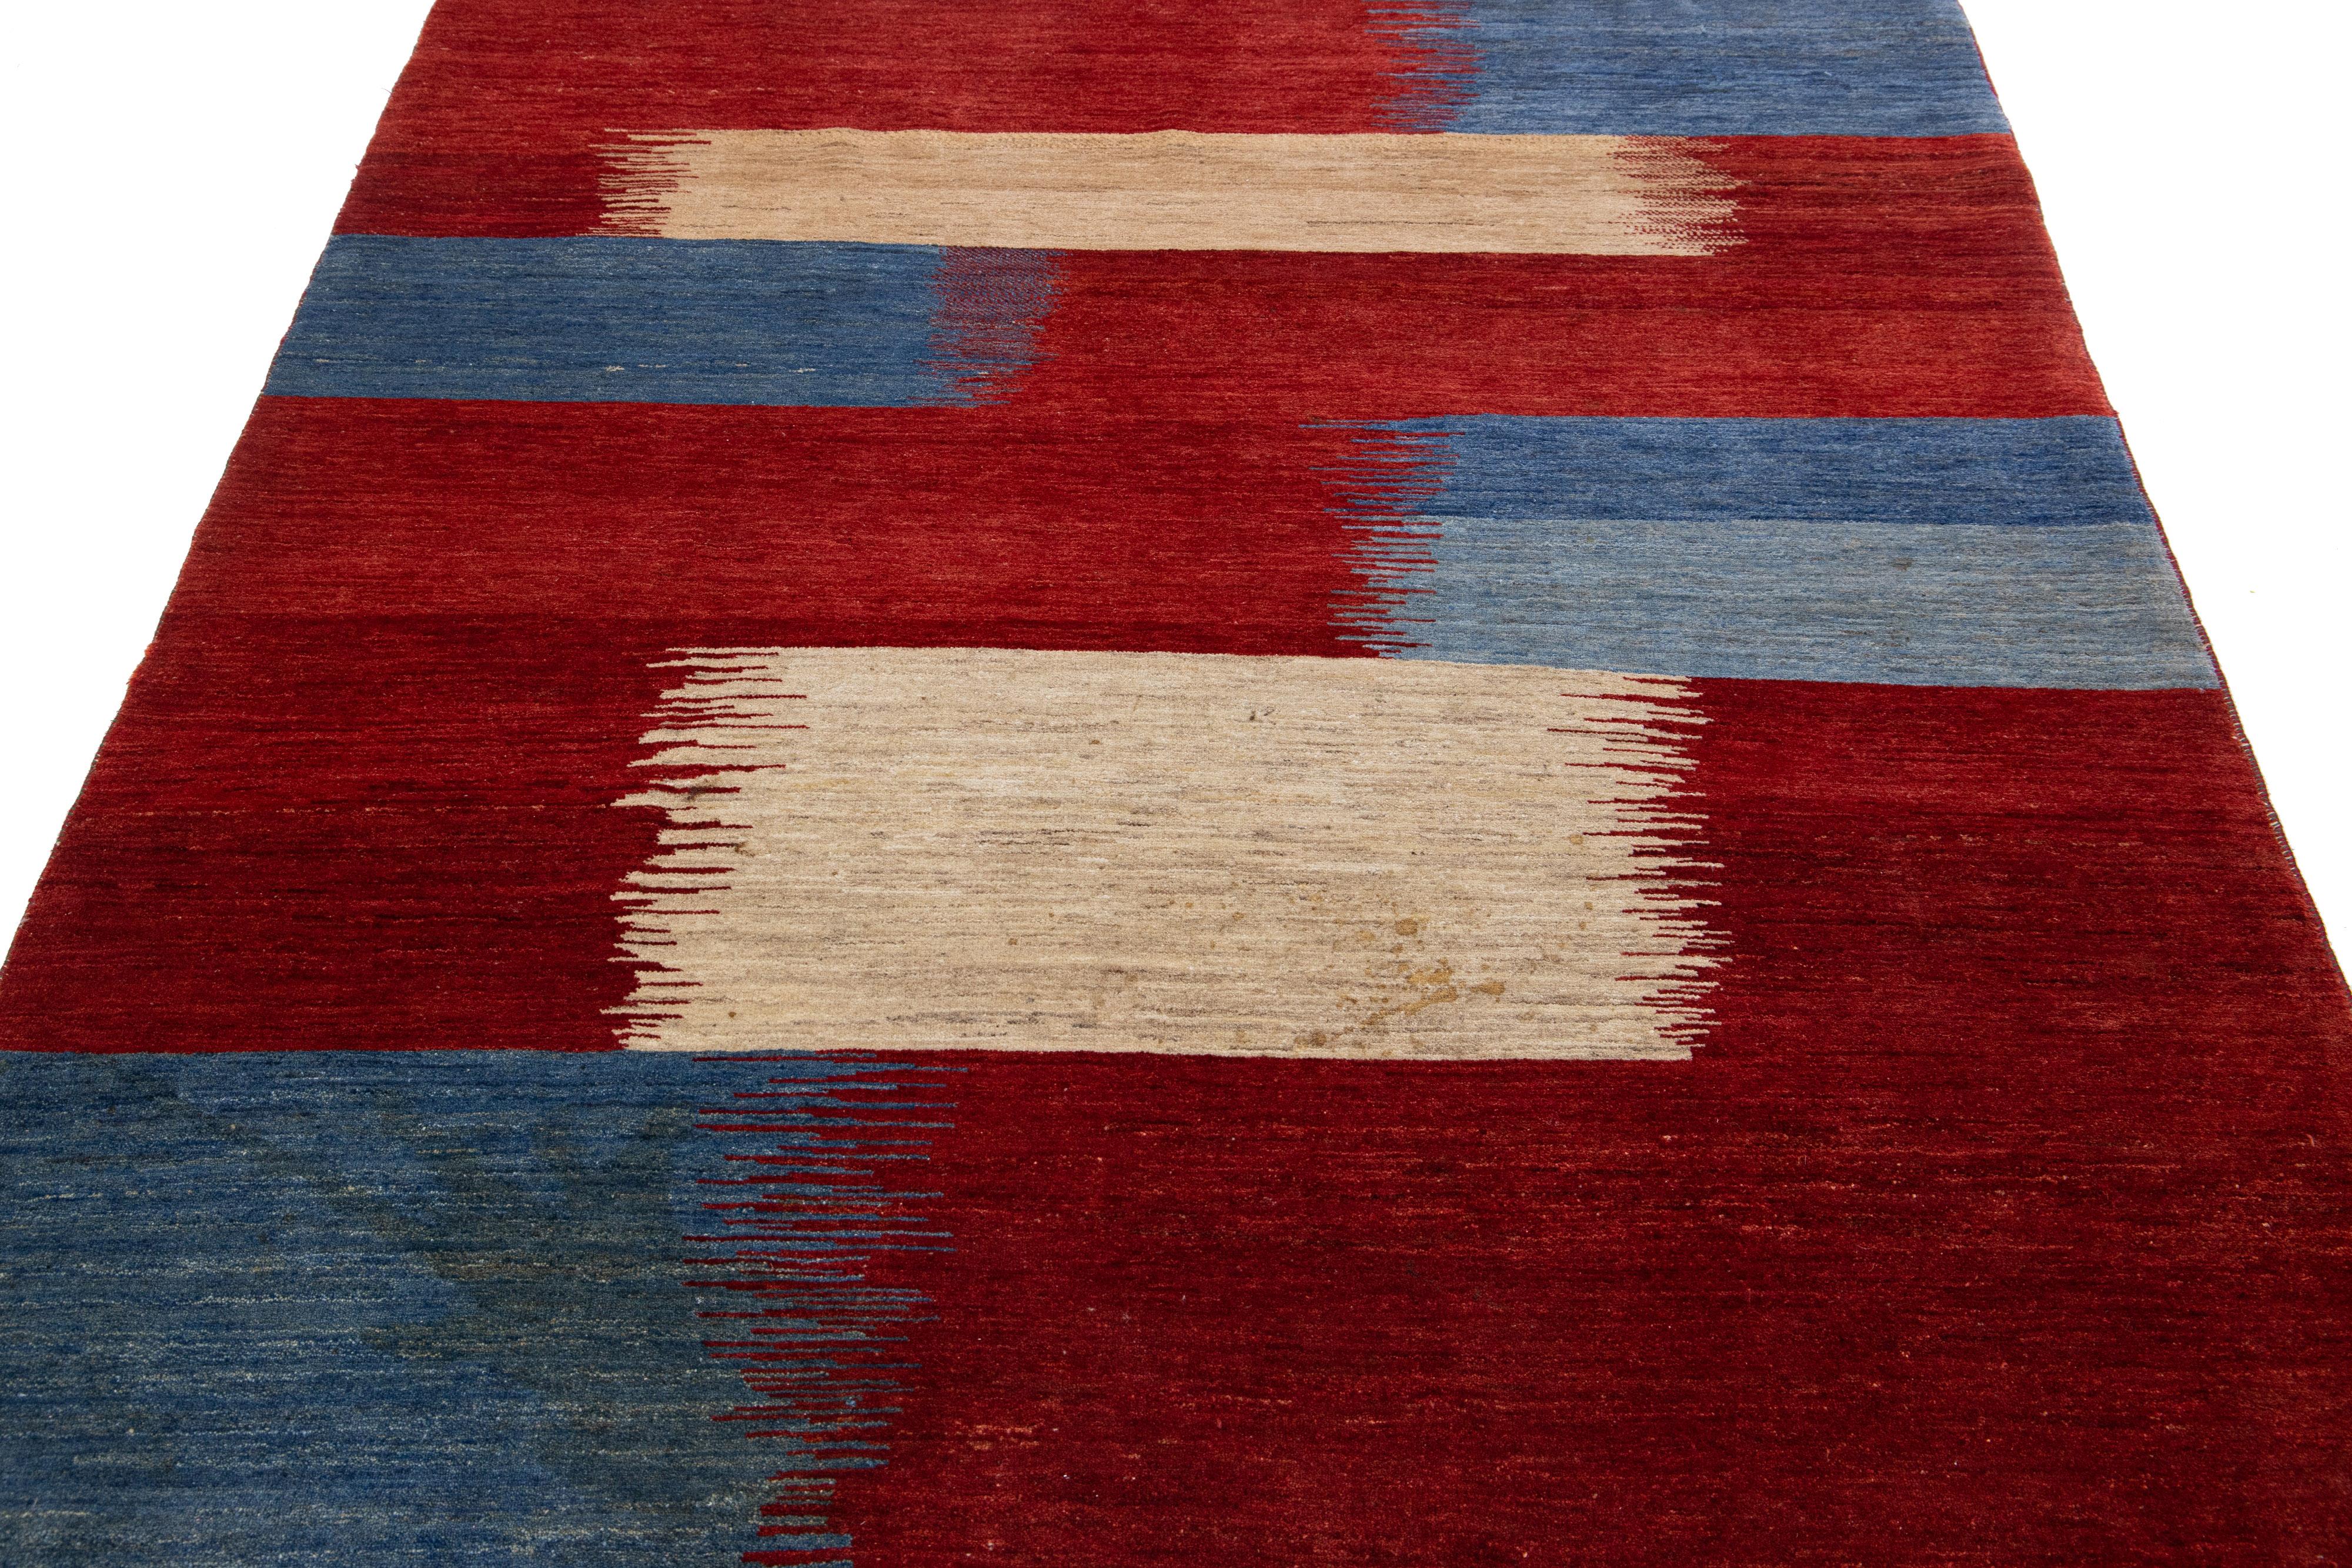 Beautiful modern Gabbeh-style hand-woven wool rug with a red color field. This piece has blue and beige accents in a gorgeous abstract design.

This rug measures: 5'2